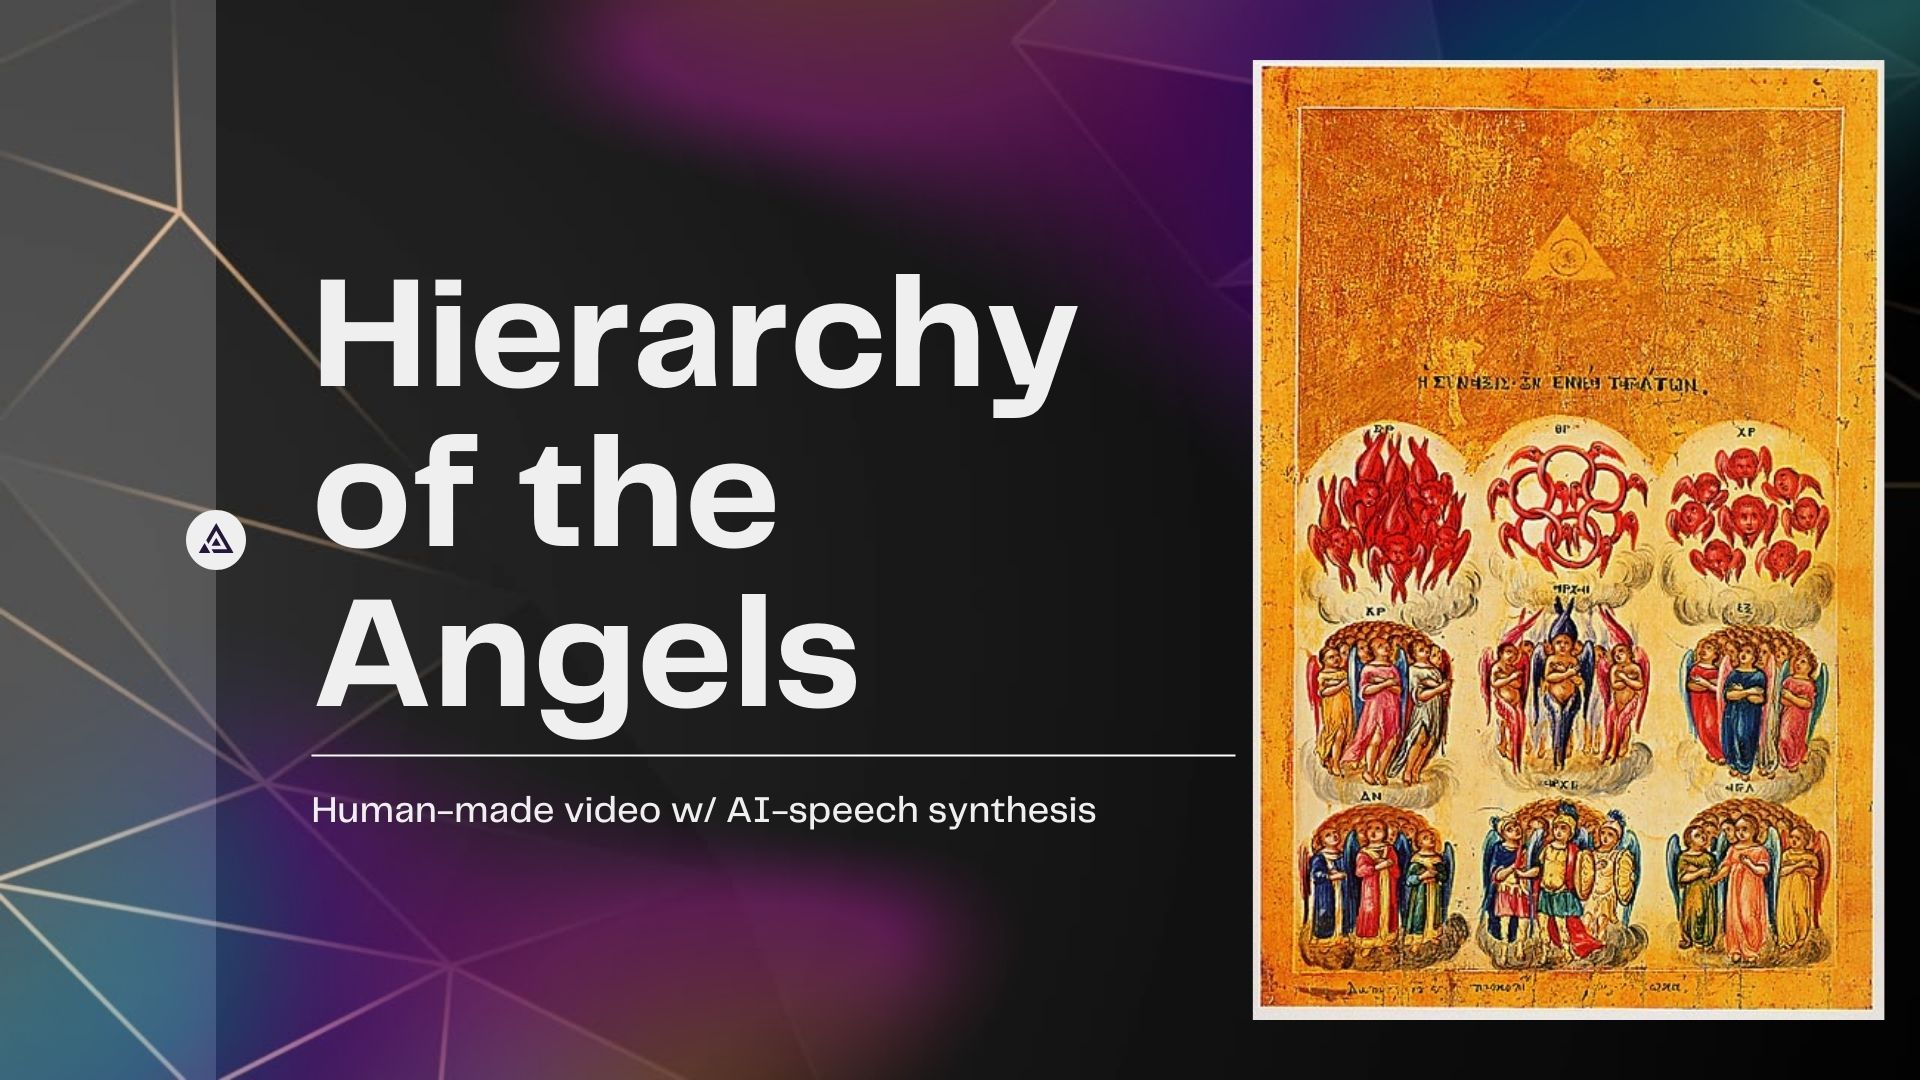 The Hierarchy and Number of Angels